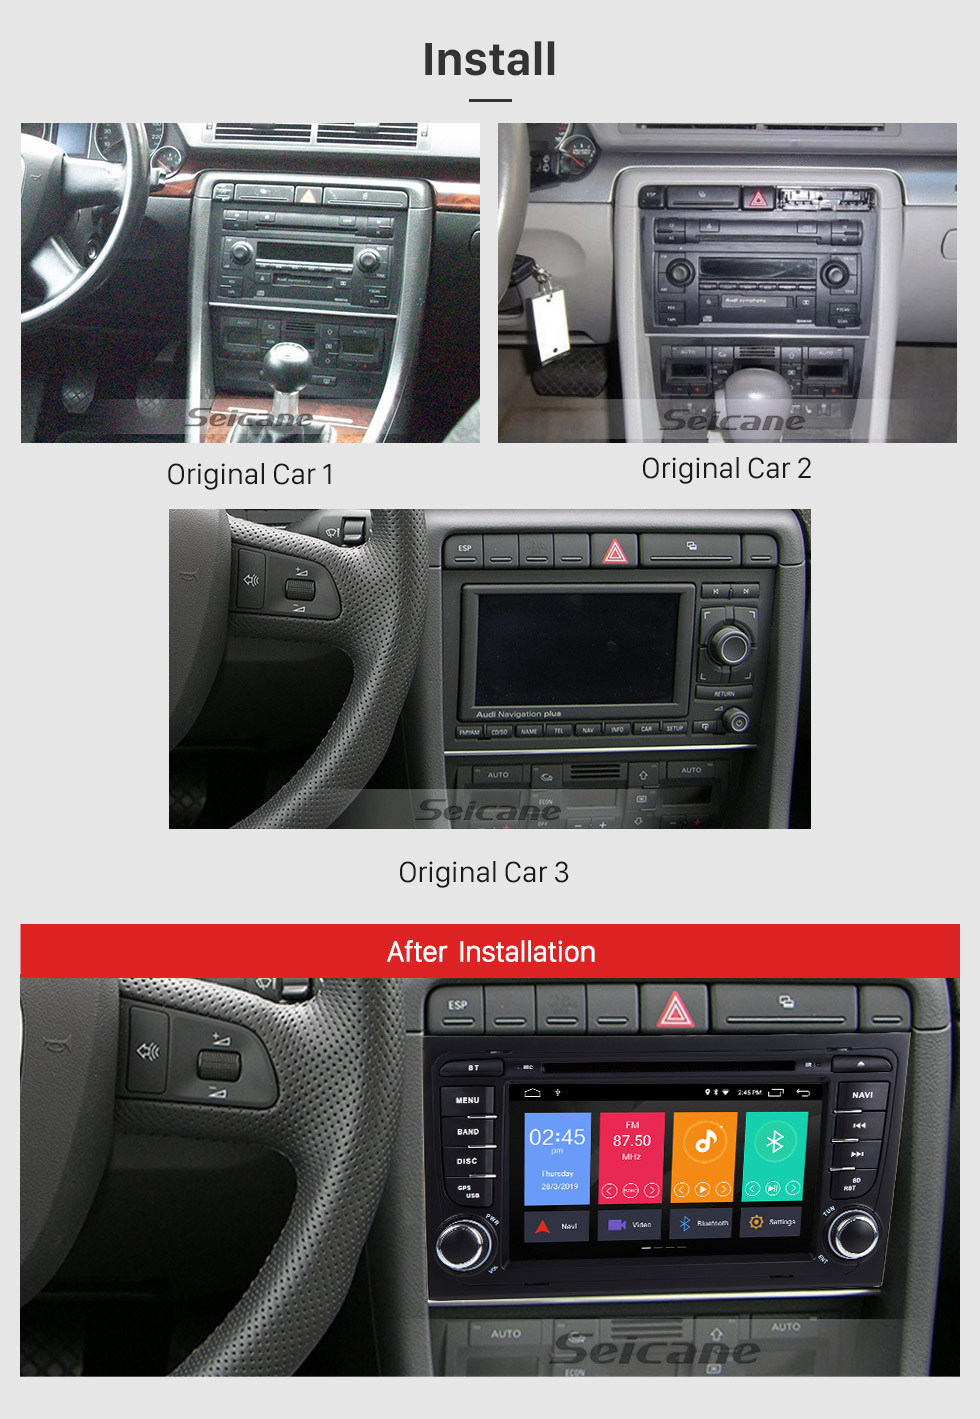 Seicane HD 1024*600 Multi-touch Screen Android 10.0 DVD Navigation Head Unit for 2013 2014 2015 SEAT EXEO with Radio Tuner 4G WiFi Bluetooth Music Mirror Link OBD2 AUX DVR